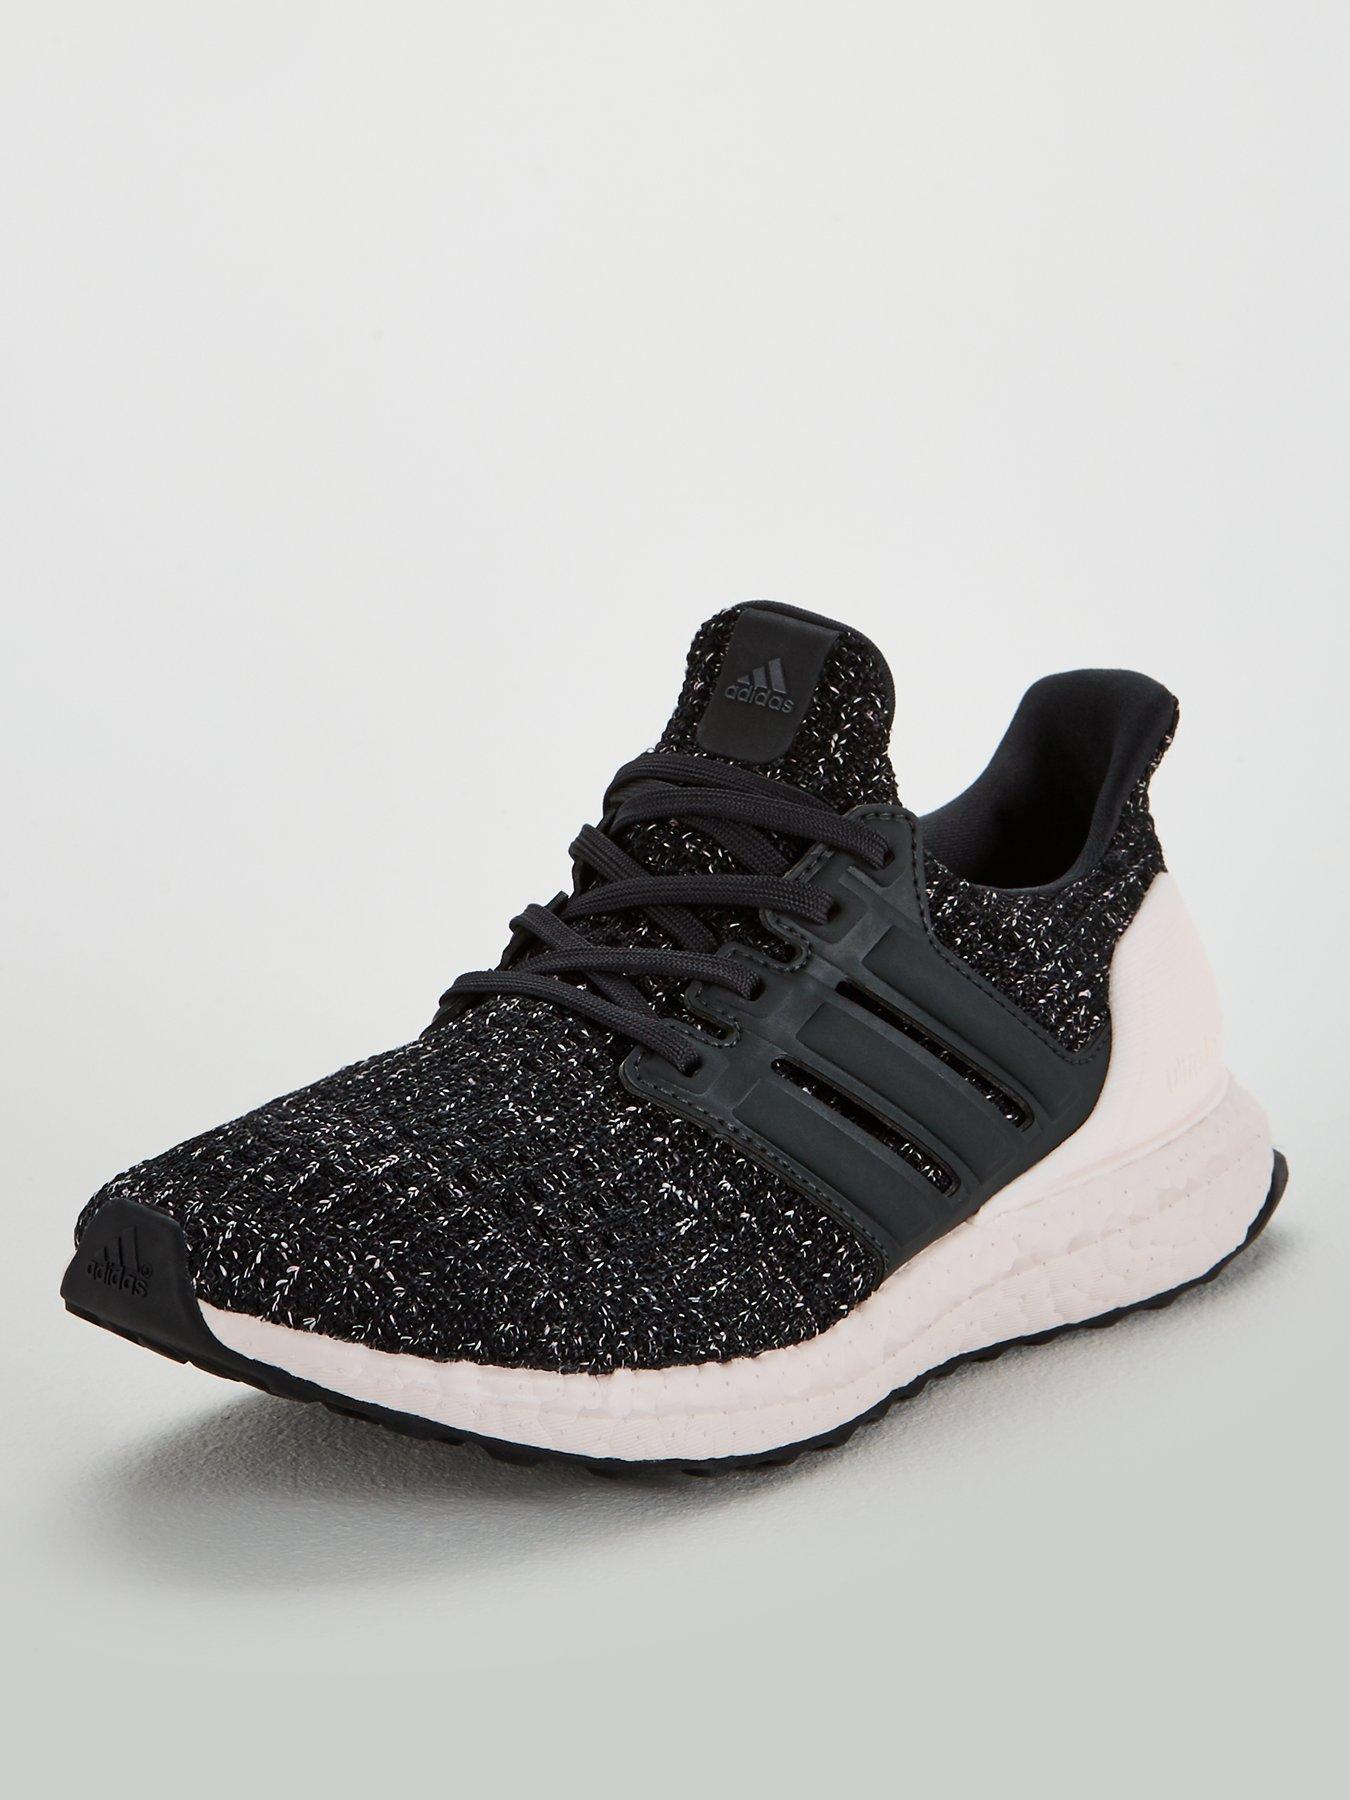 adidas ultra boost black and pink